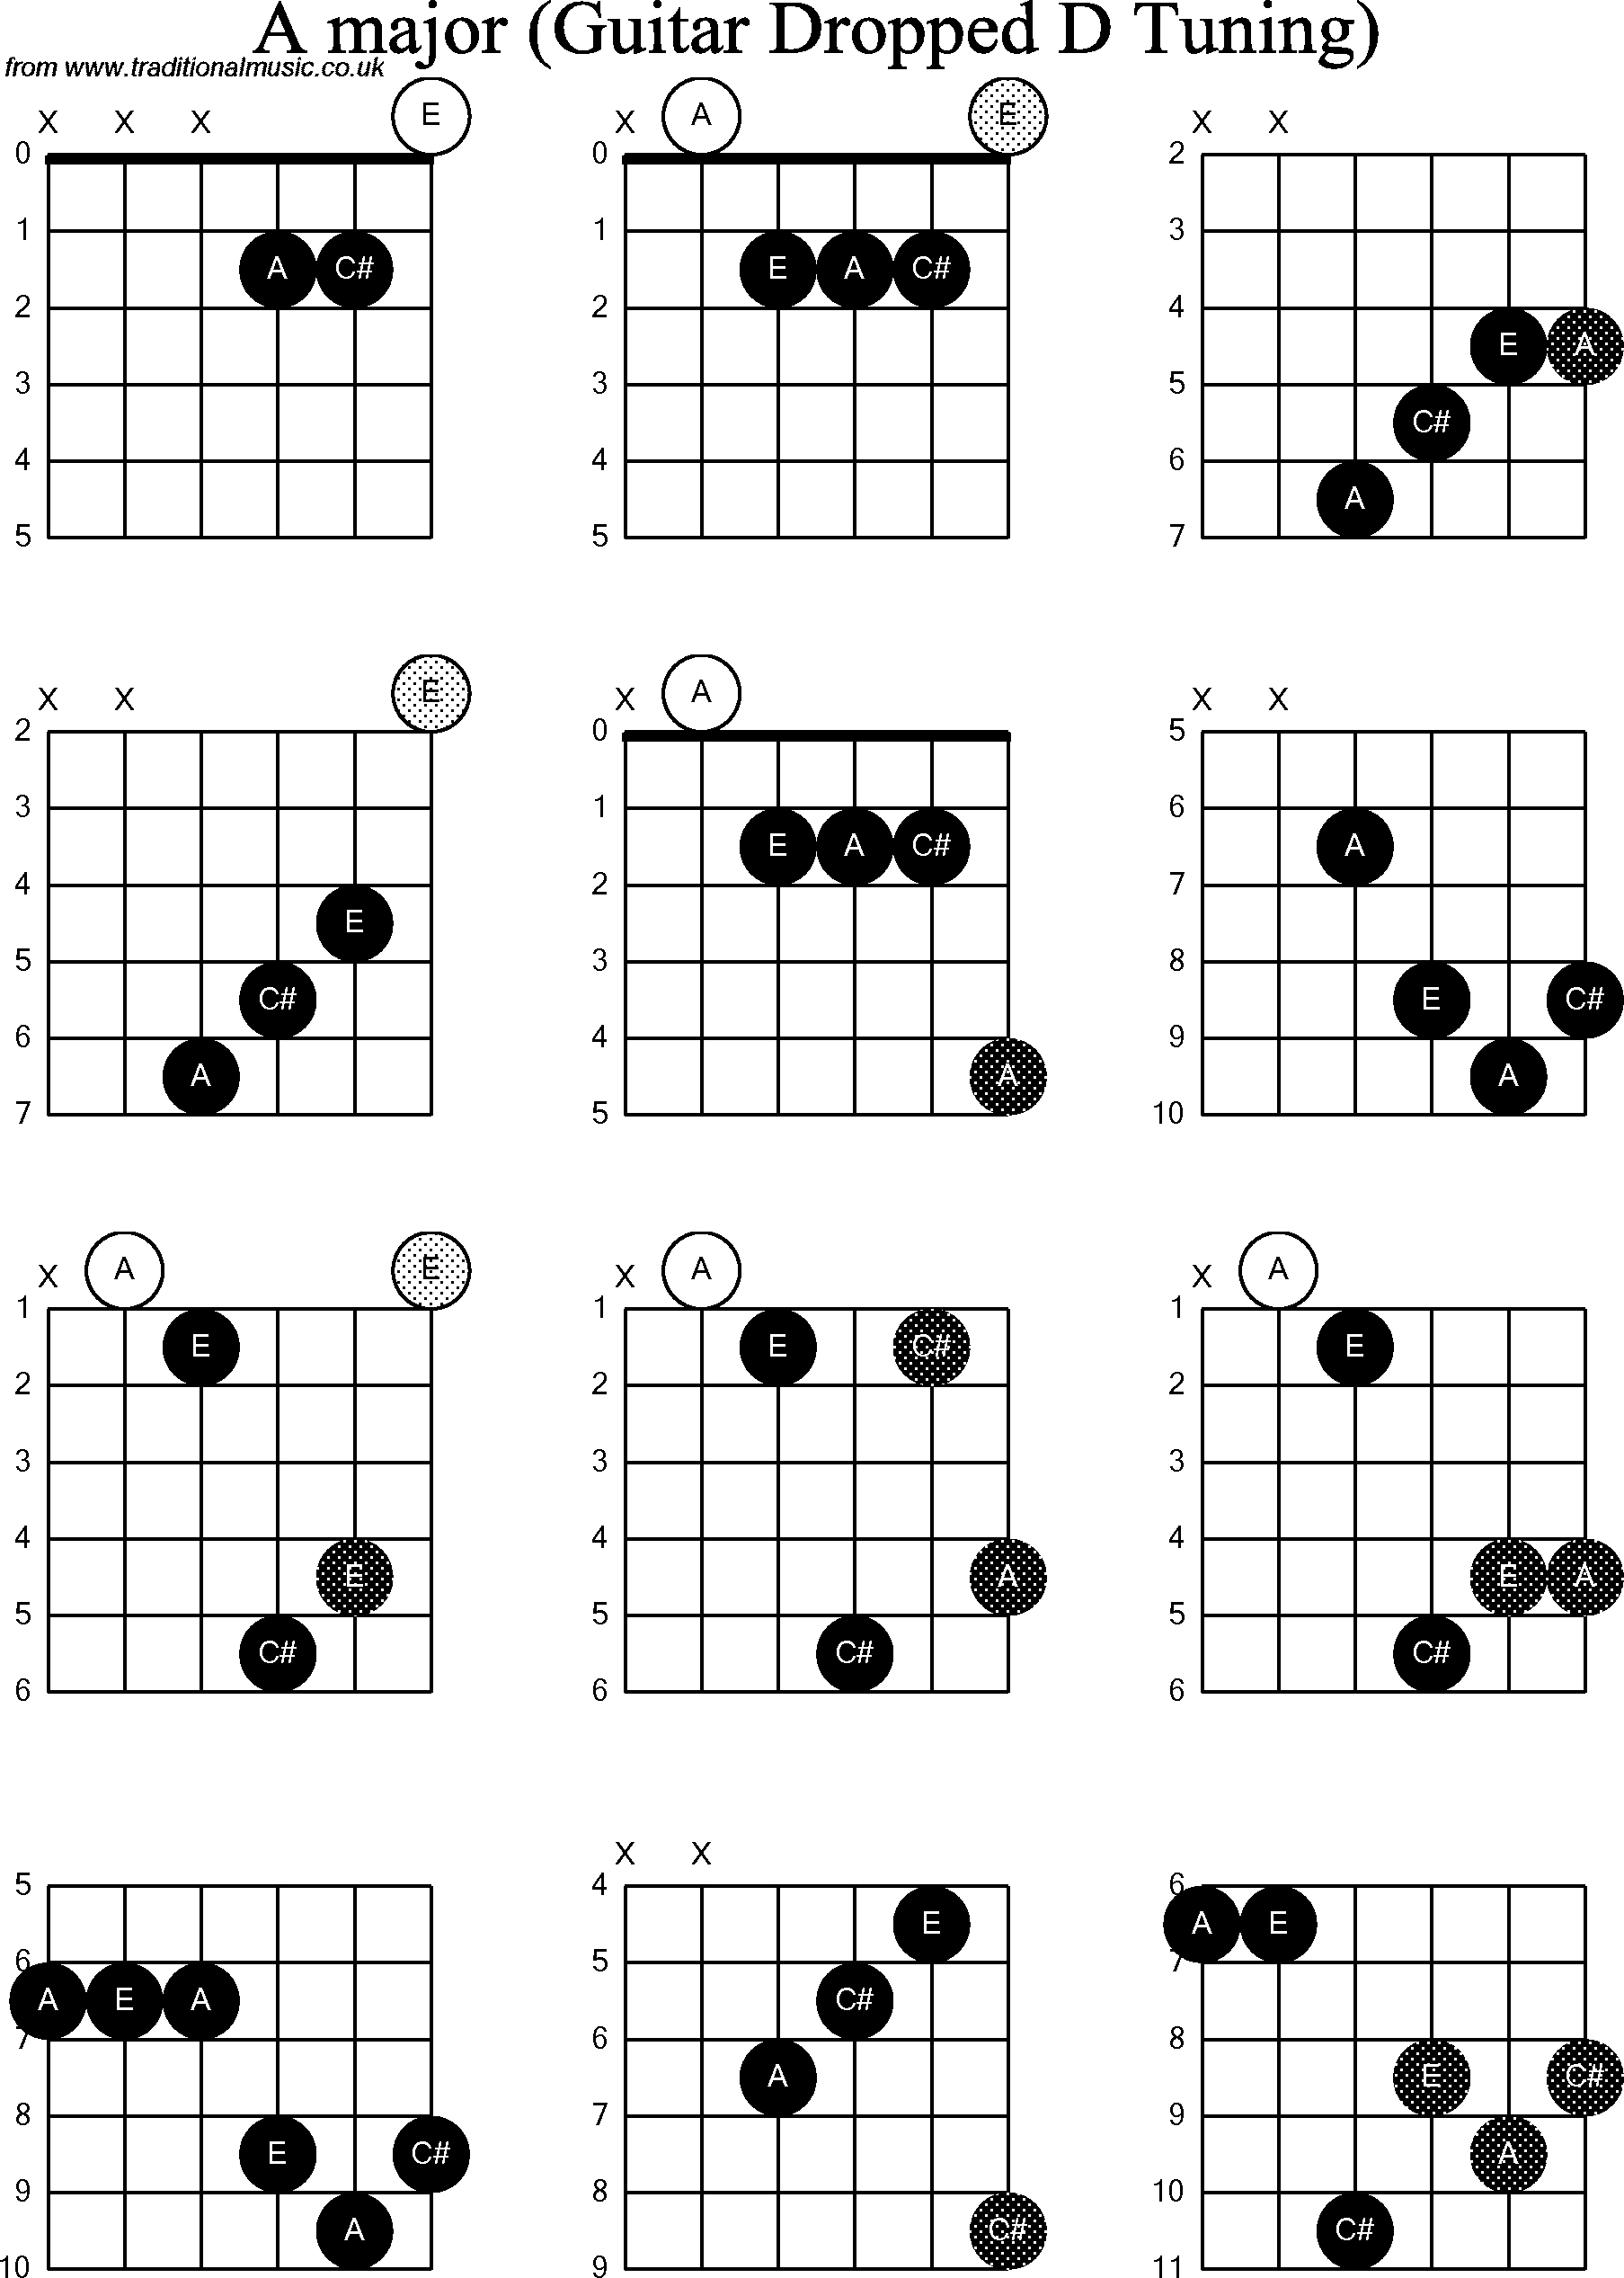 Chord Diagrams For Dropped D Guitardadgbe A